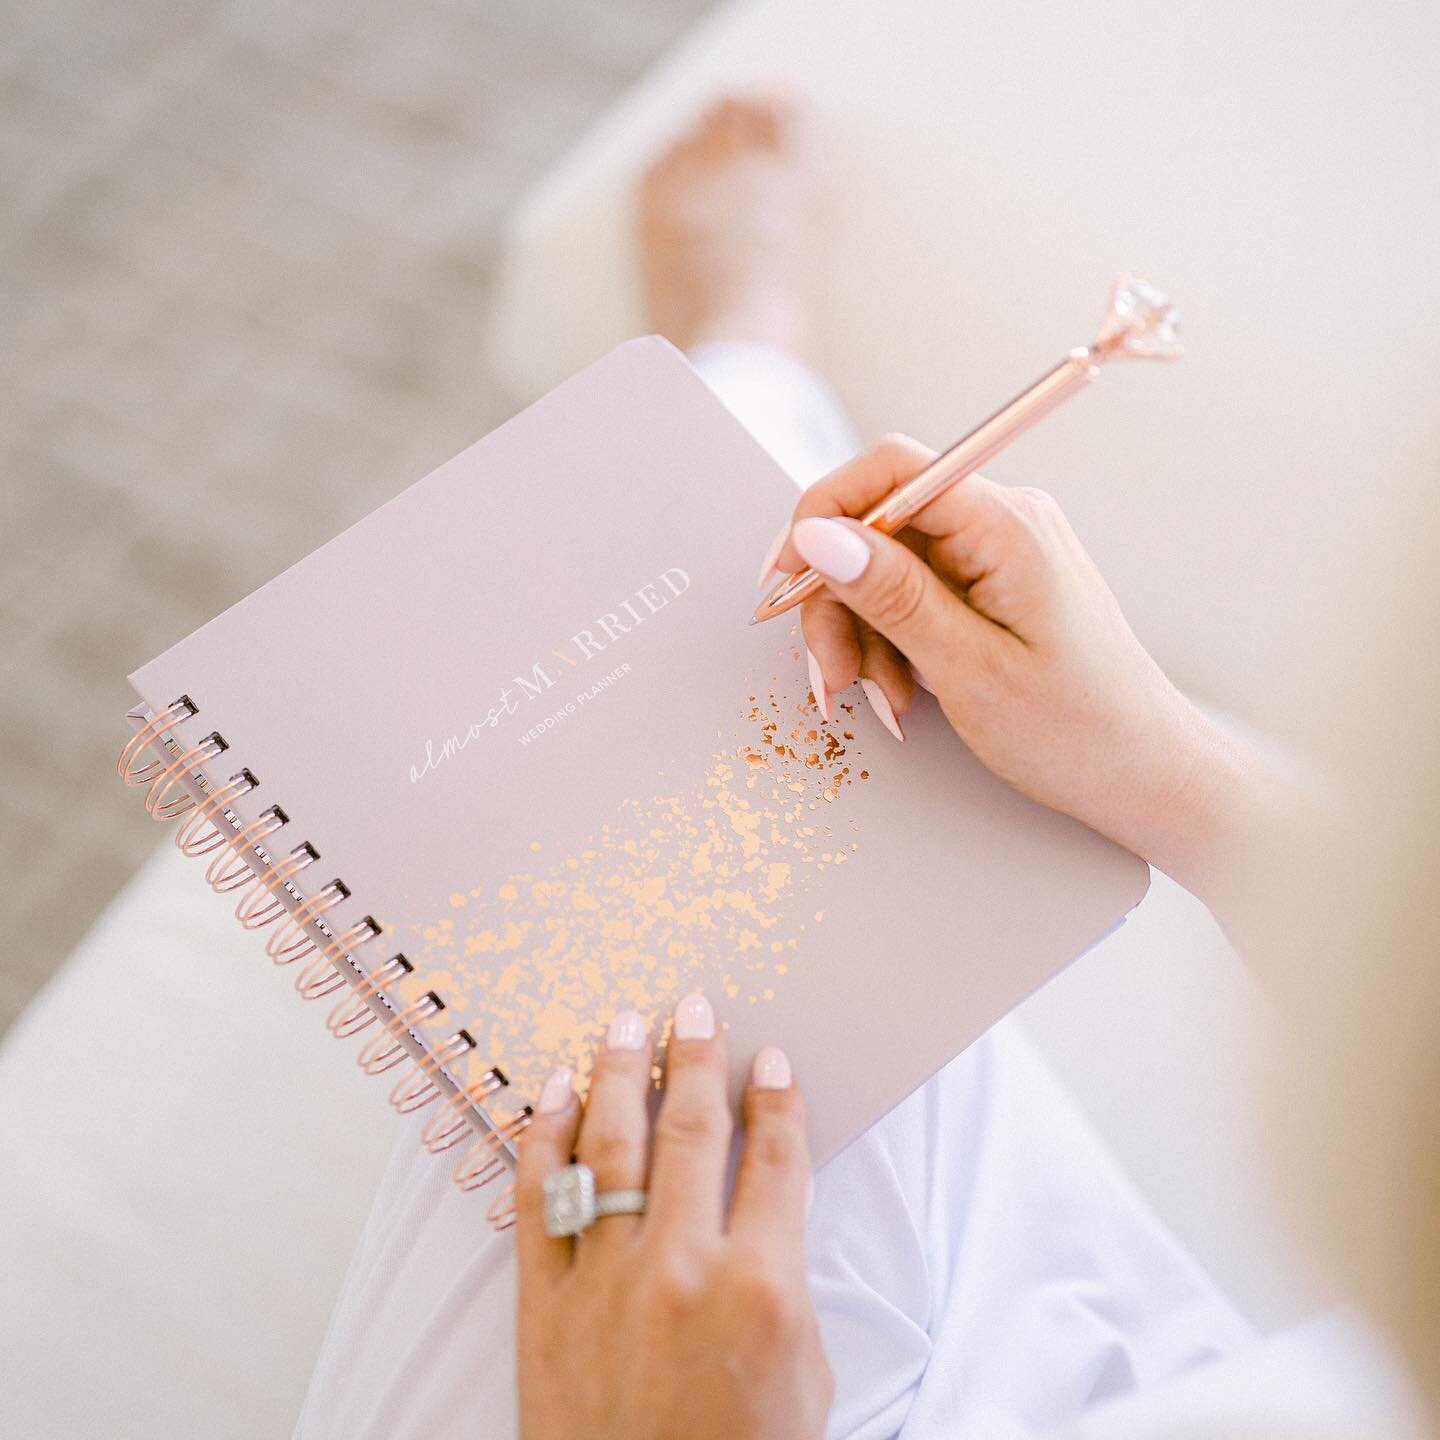 The Almost Married Wedding Planner. When an event planner &amp; luxury stationery brand meet and create the perfect journal to keep you organized for the big day. Included in the Almost Married bridal box or available on its own. Inside you&rsquo;ll 